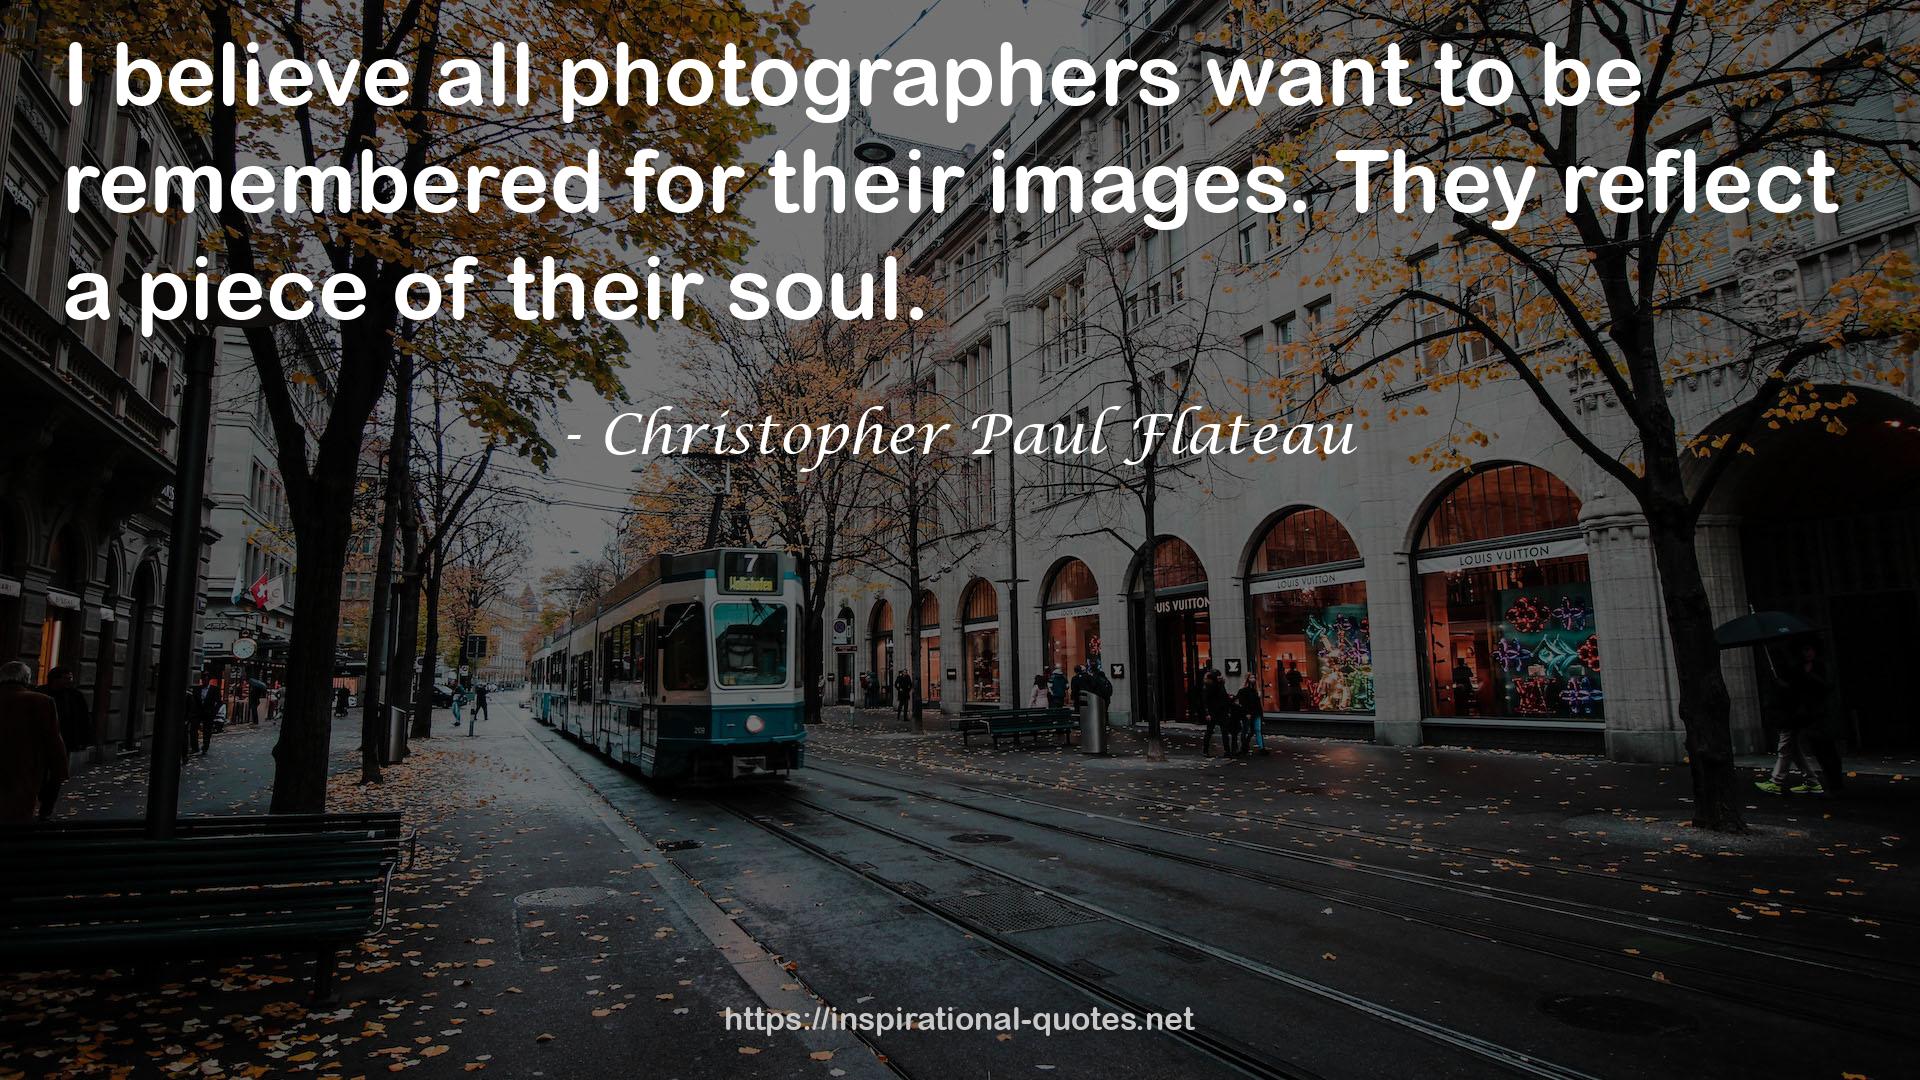 Christopher Paul Flateau QUOTES